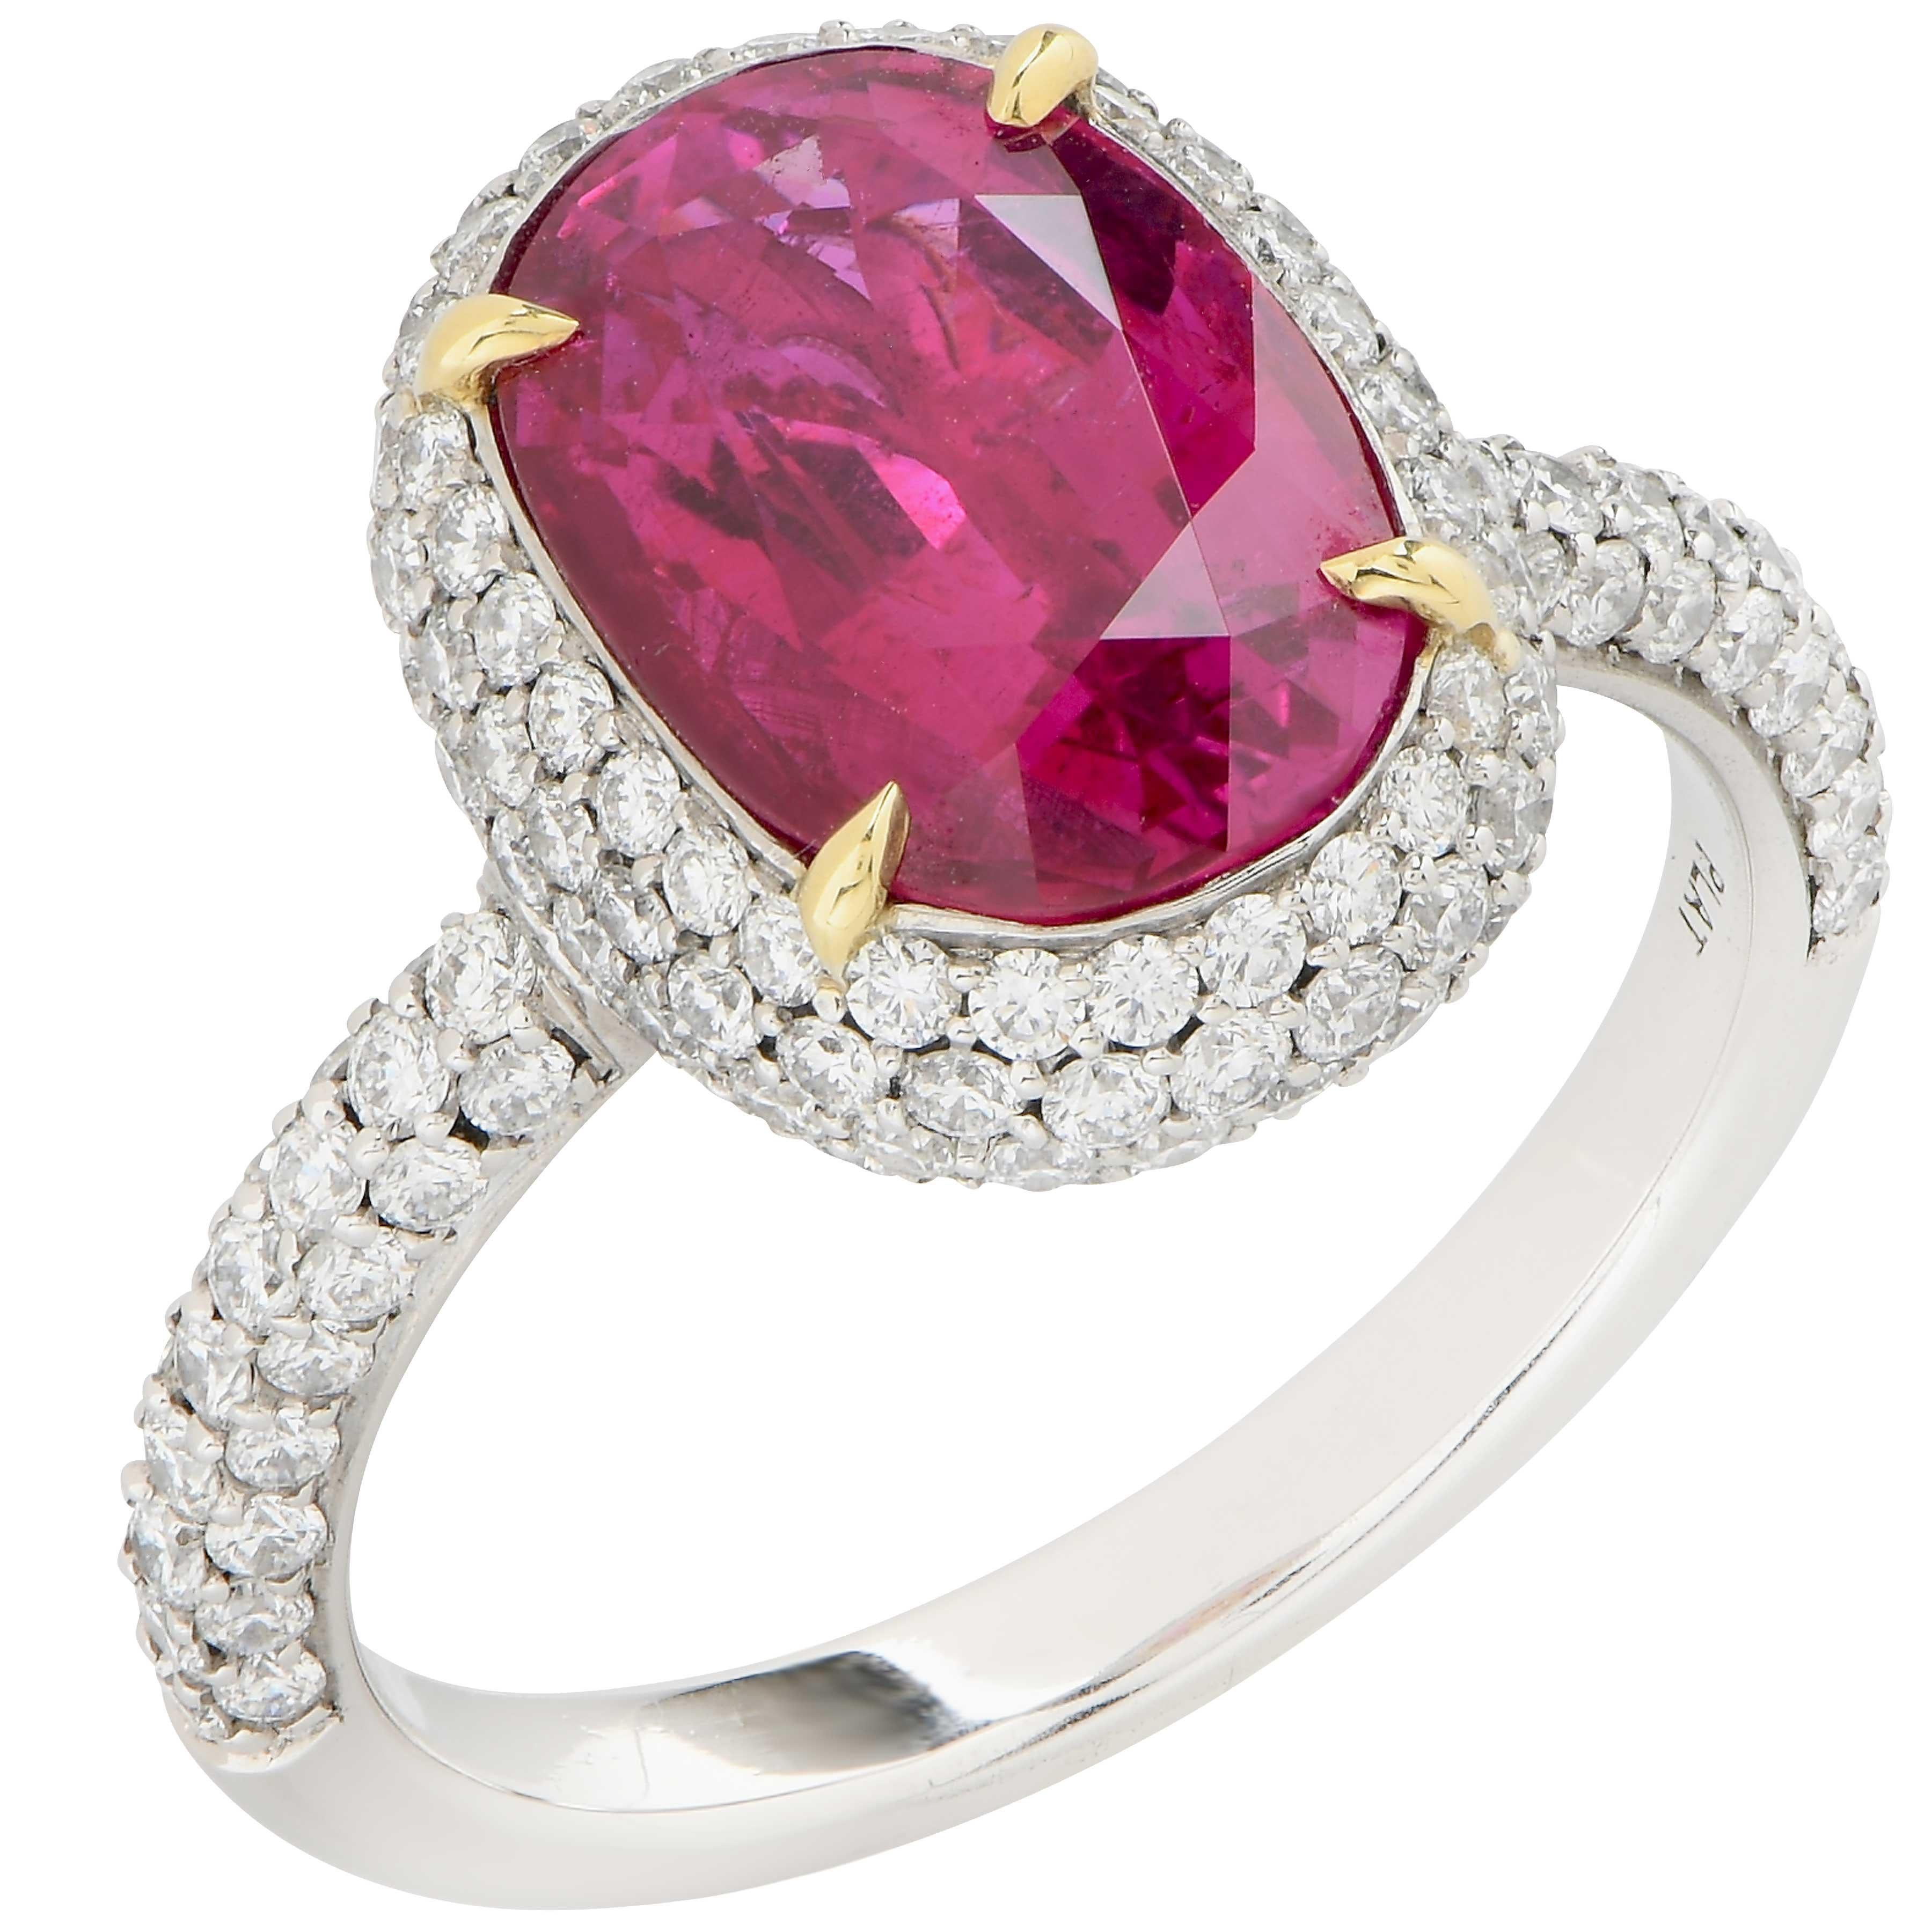 3.7 Carat Burma No Heat AGL Graded Ruby set in Platinum mounting with 166 round brilliant cut diamonds with a total weight of 1.22 carats. Ruby Color: RED.
Size 6.5
Metal Weight: 7.1 Grams
 